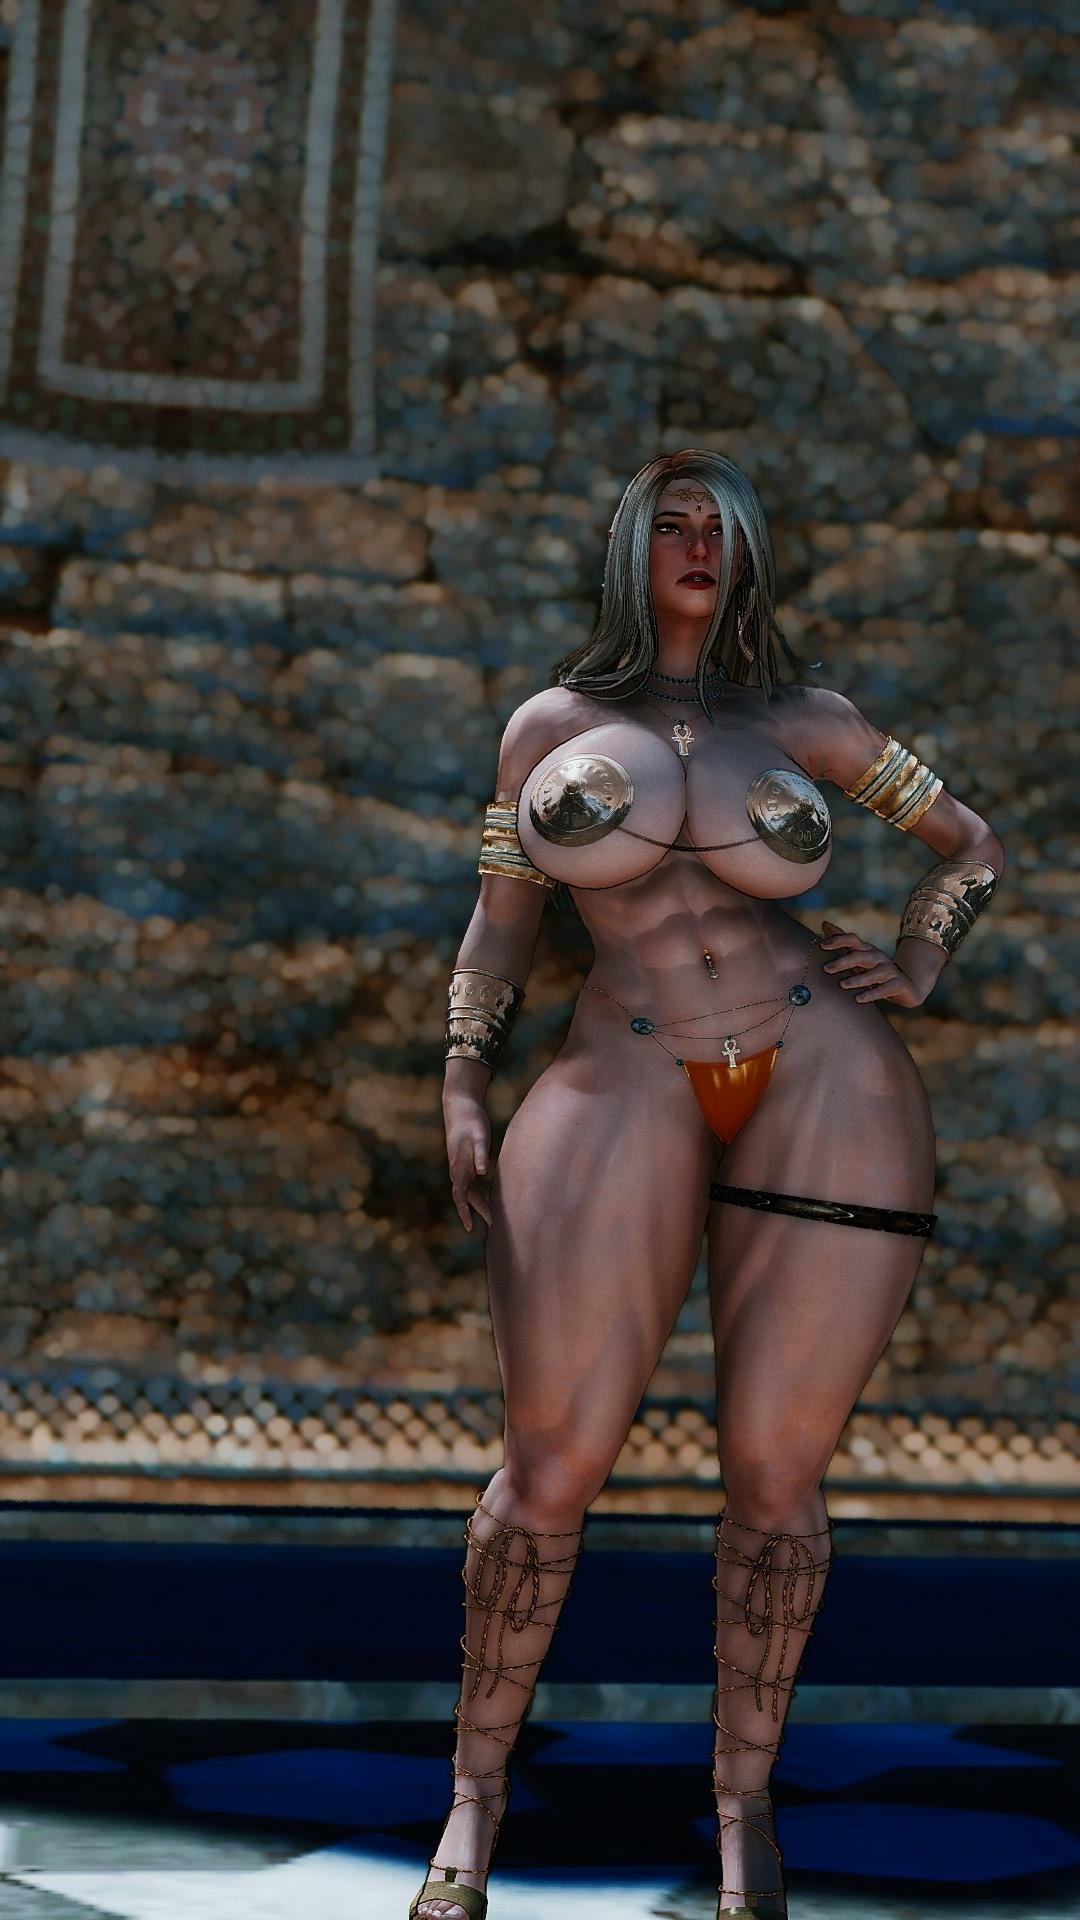 Hot and sexy Amazon with muscular body - Skyrim Modding Skyrim Amazon Sexy Muscular Girl Muscles Thicc Thighs Viking Big Booty Big Tits Videogame